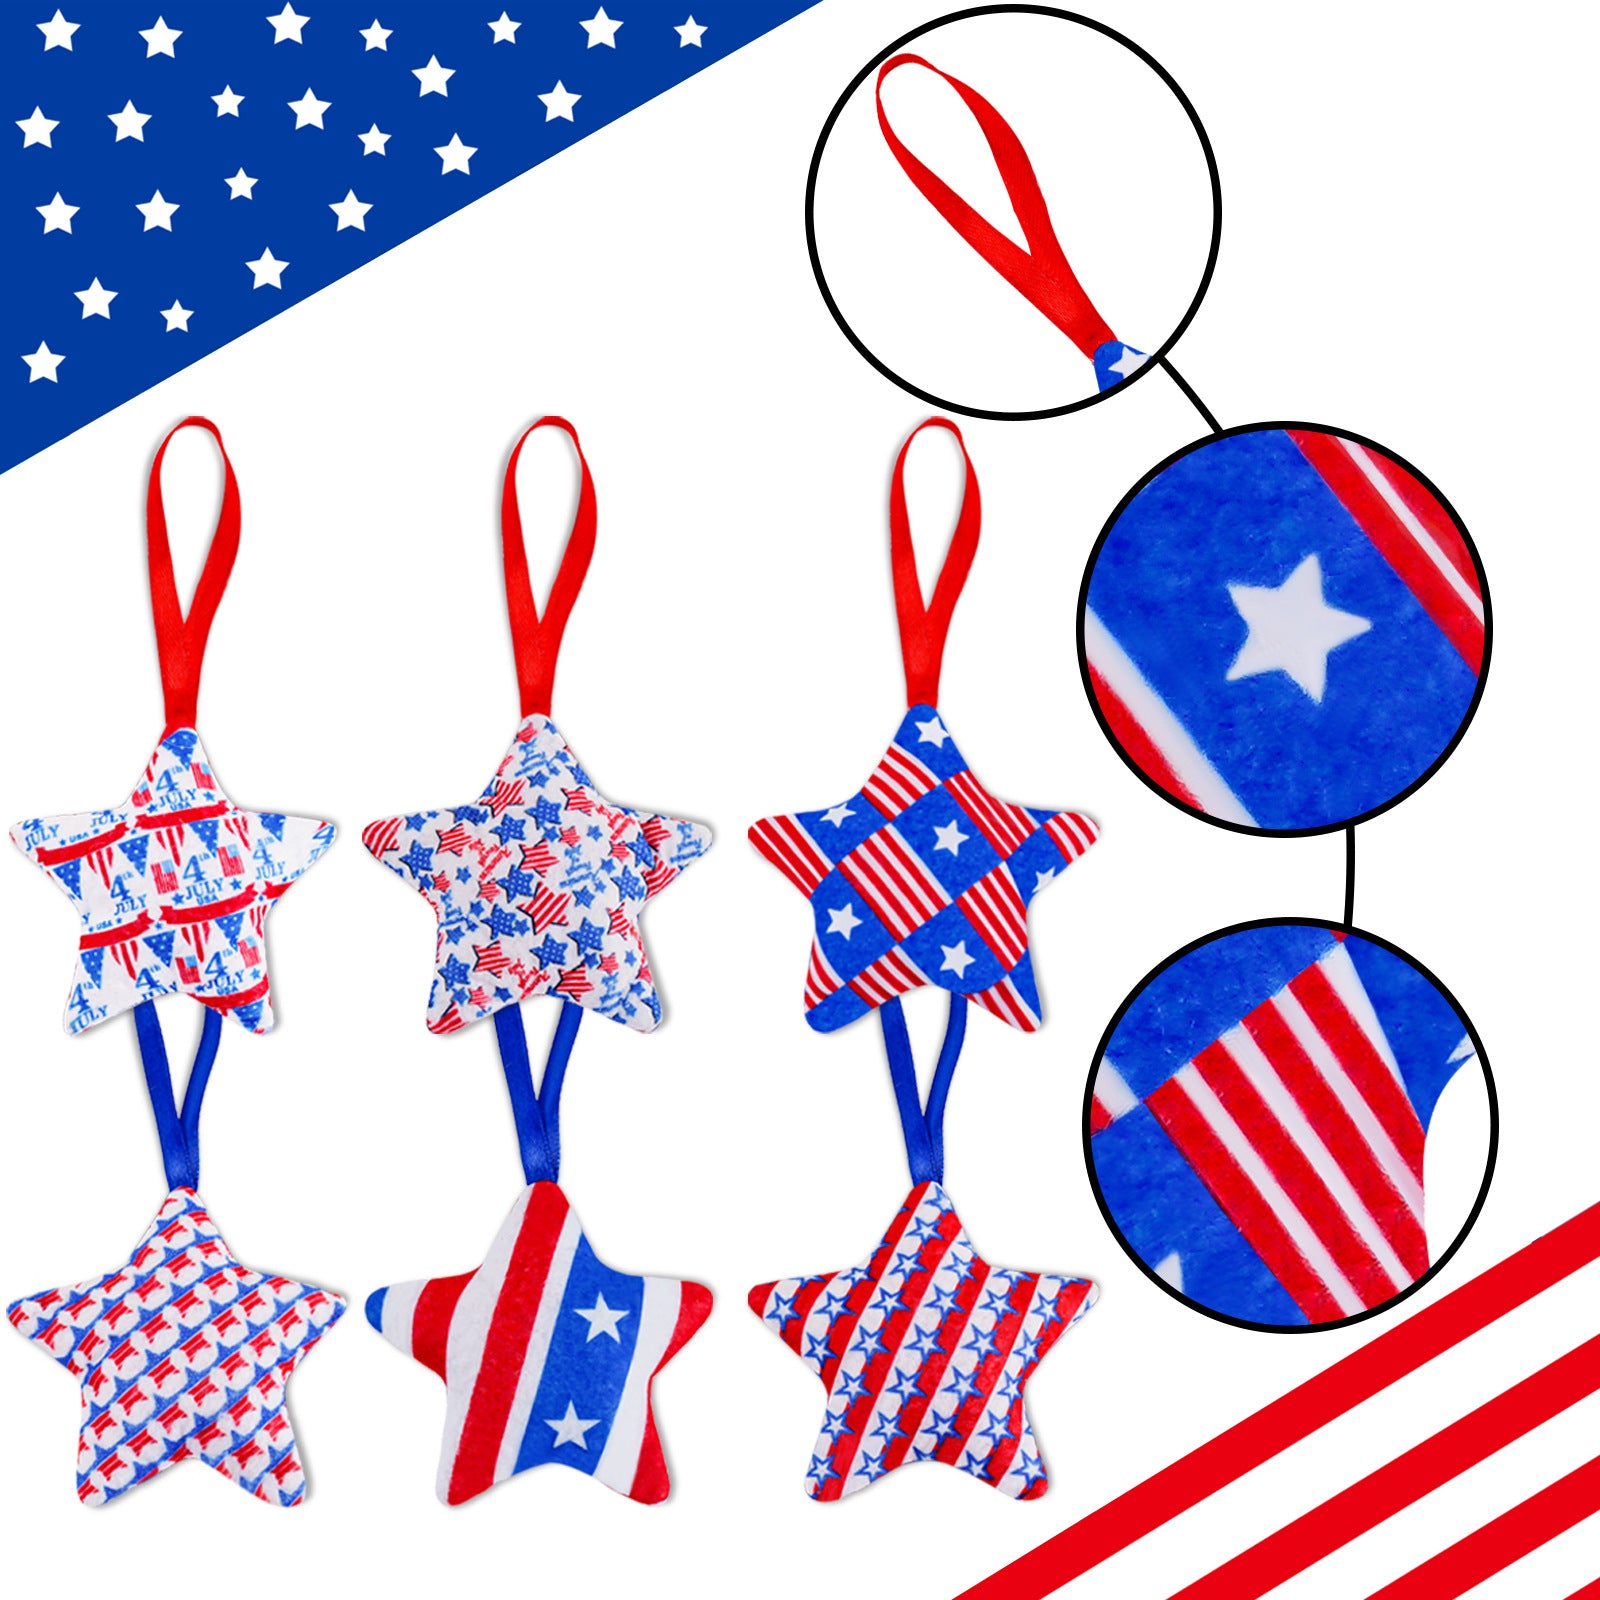 American Independence Day Love Cotton Five-star Modeling Decorations Pendant, 4th of July decorations, American flag decorations, Patriotic decorations, Red, white and blue decorations, July 4th wreaths, July 4th garlands, July 4th centerpieces, Fireworks decorations, July 4th banners,